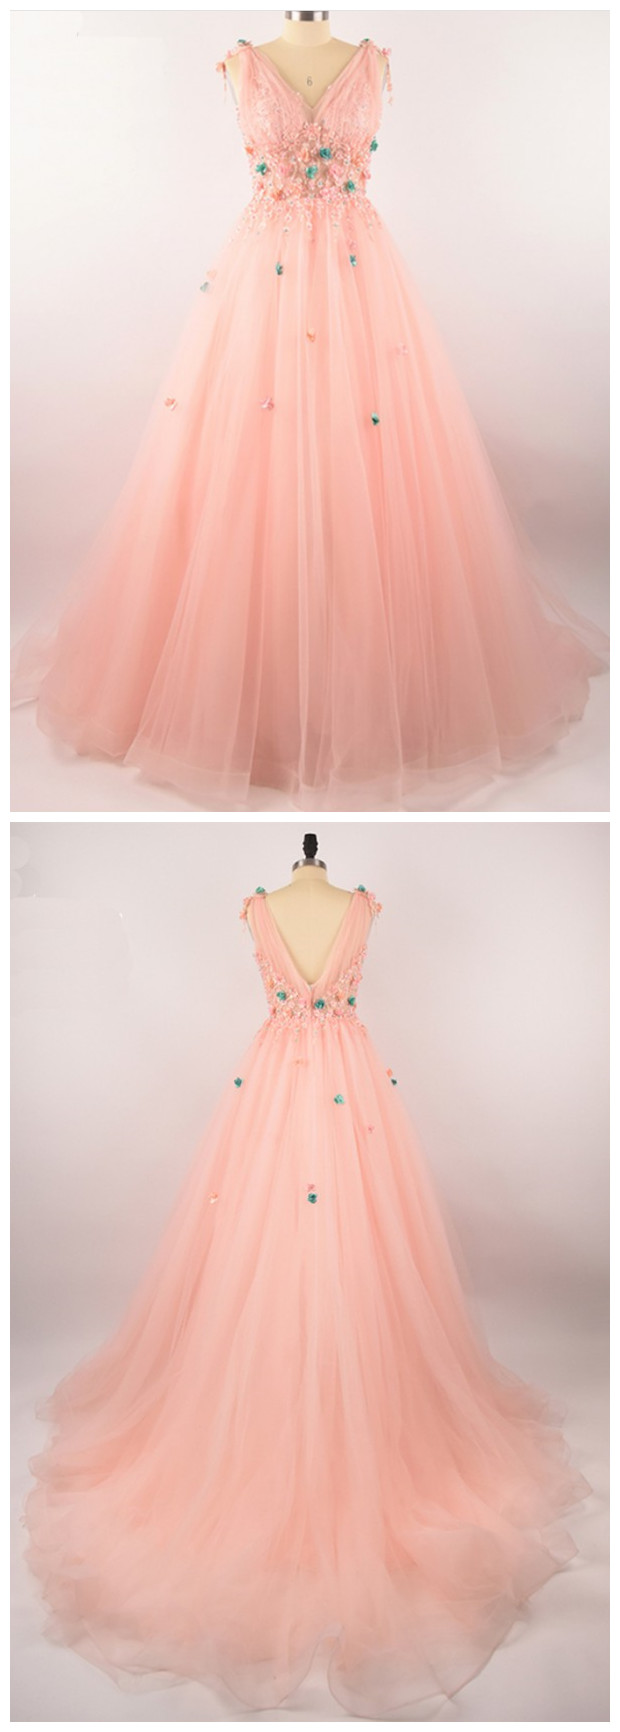 Pink Tulle Long Prom Dress,v Nekc Evening Gowns ,floor Length Evening Dress, Flower Applique Party Gowns